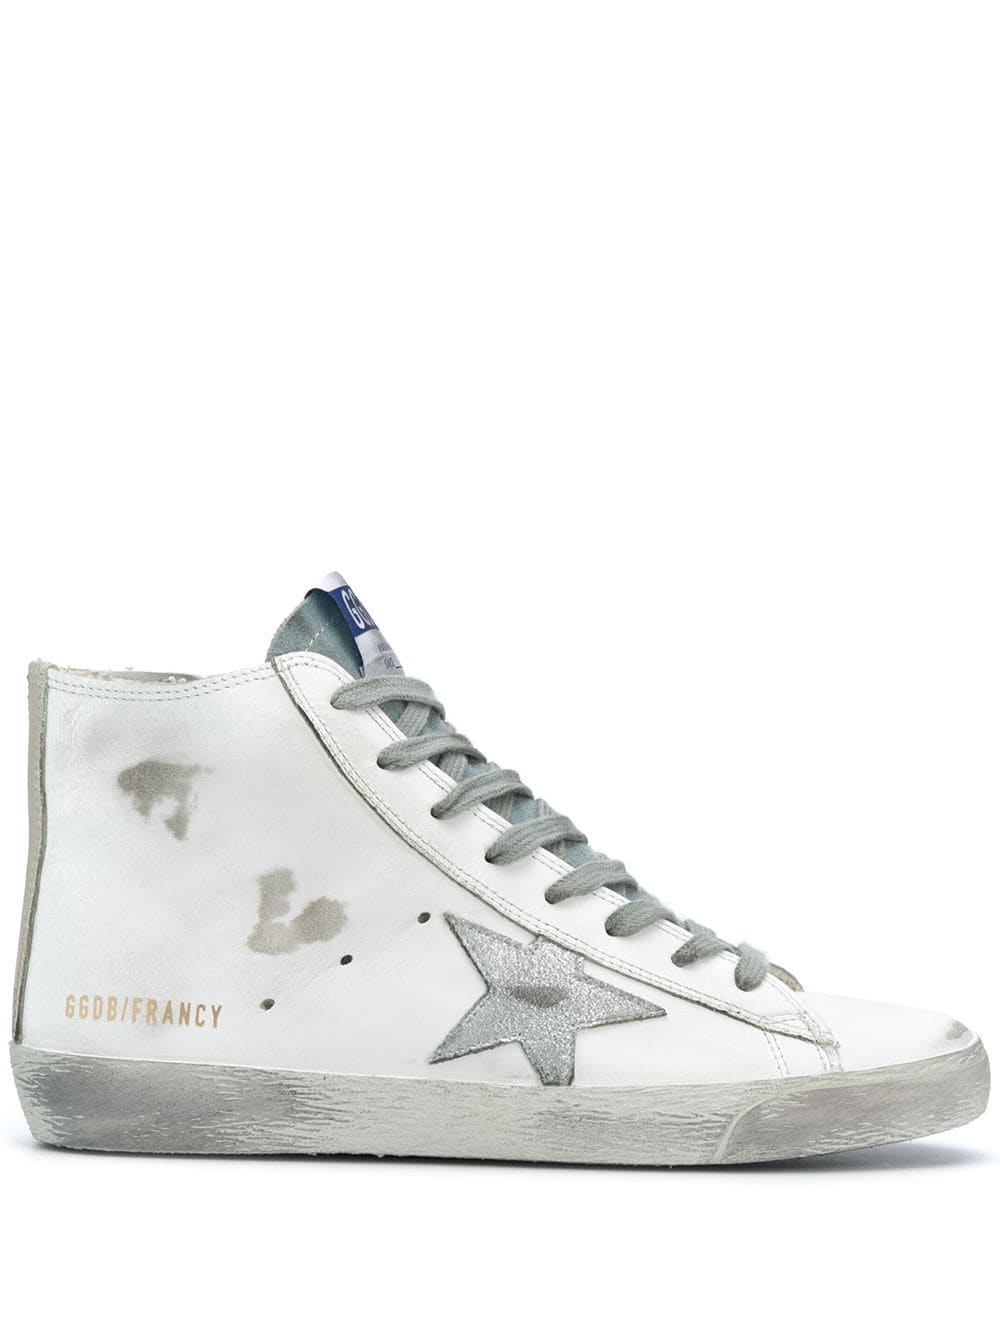 Golden Goose Woman White Francy Sneakers With Silver Laminated Star